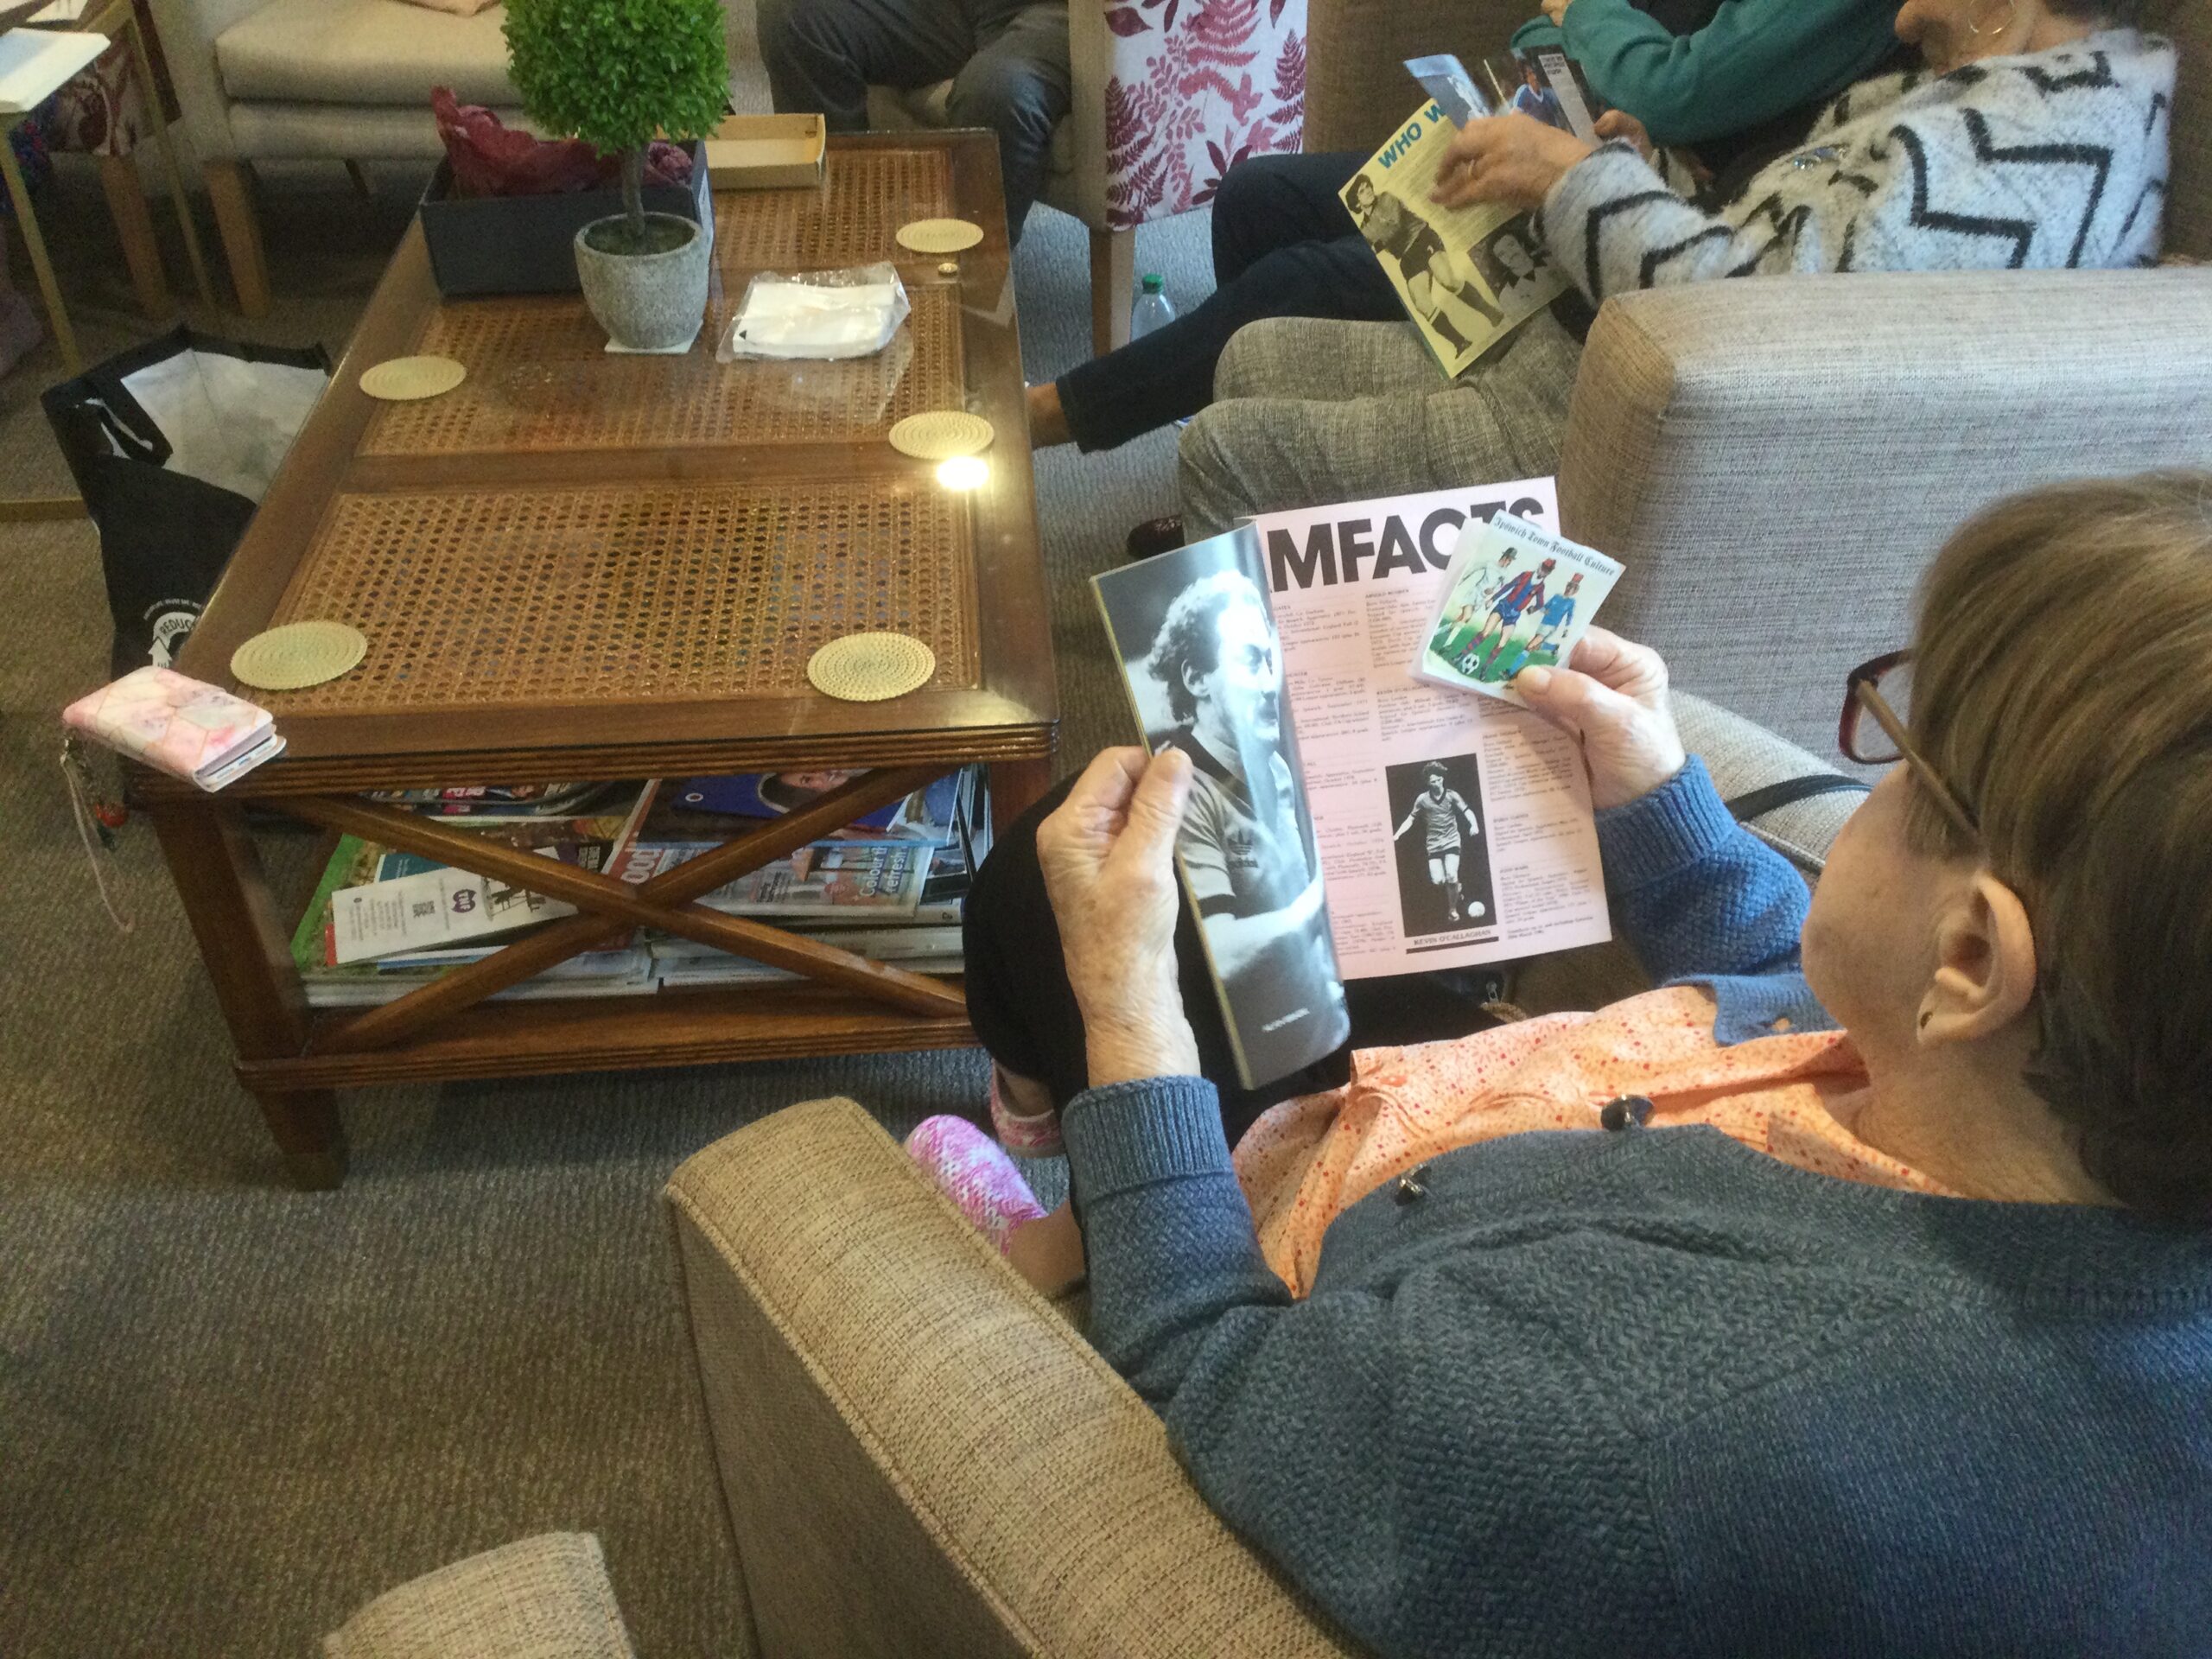 A view over a person's shoulder as she she reads an article in a football programme